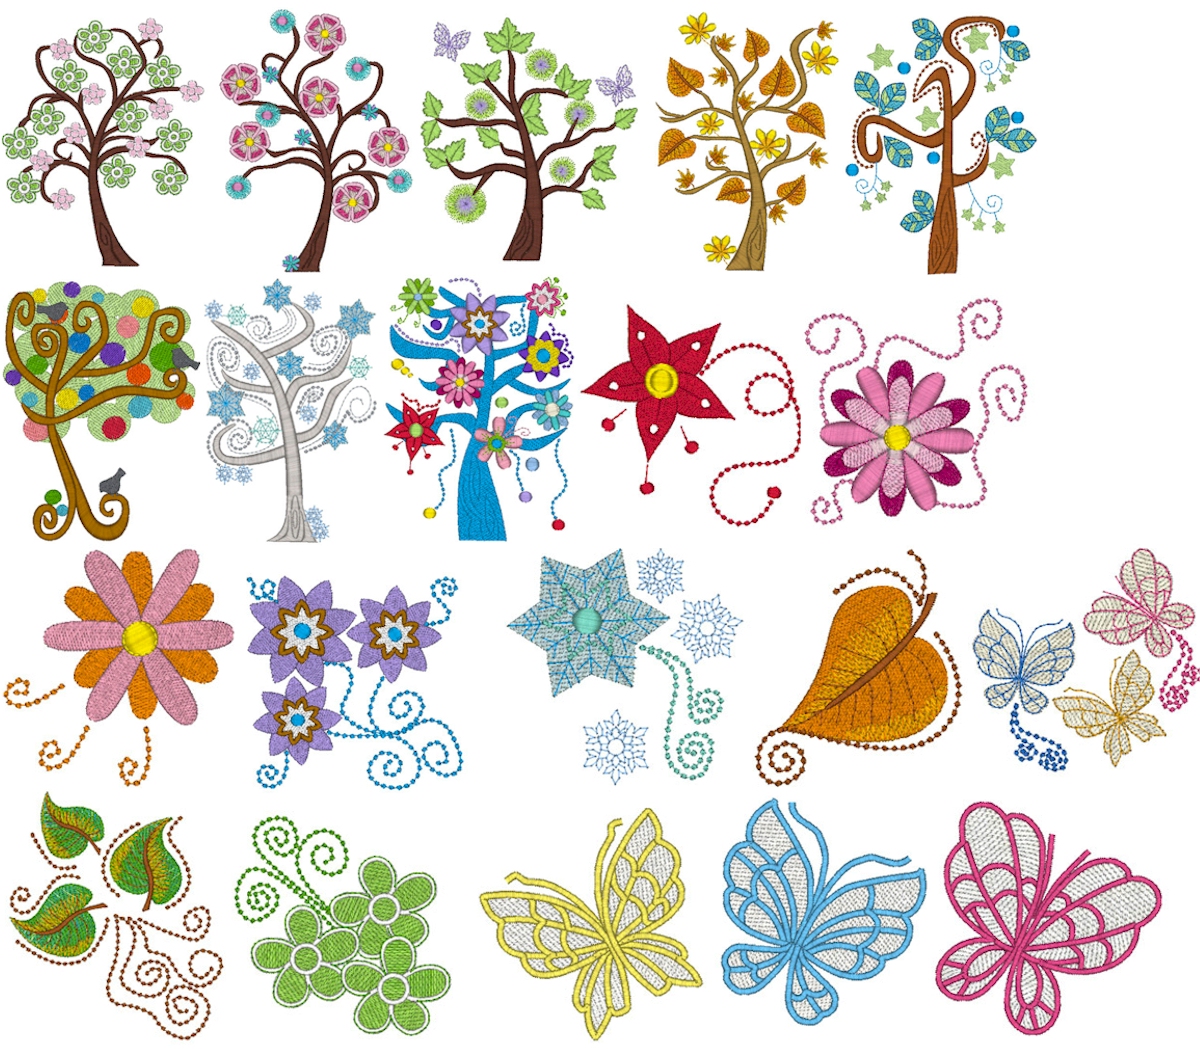 Whimsical Trees Mylar Embroidery Designs by Purely Gates Embroidery